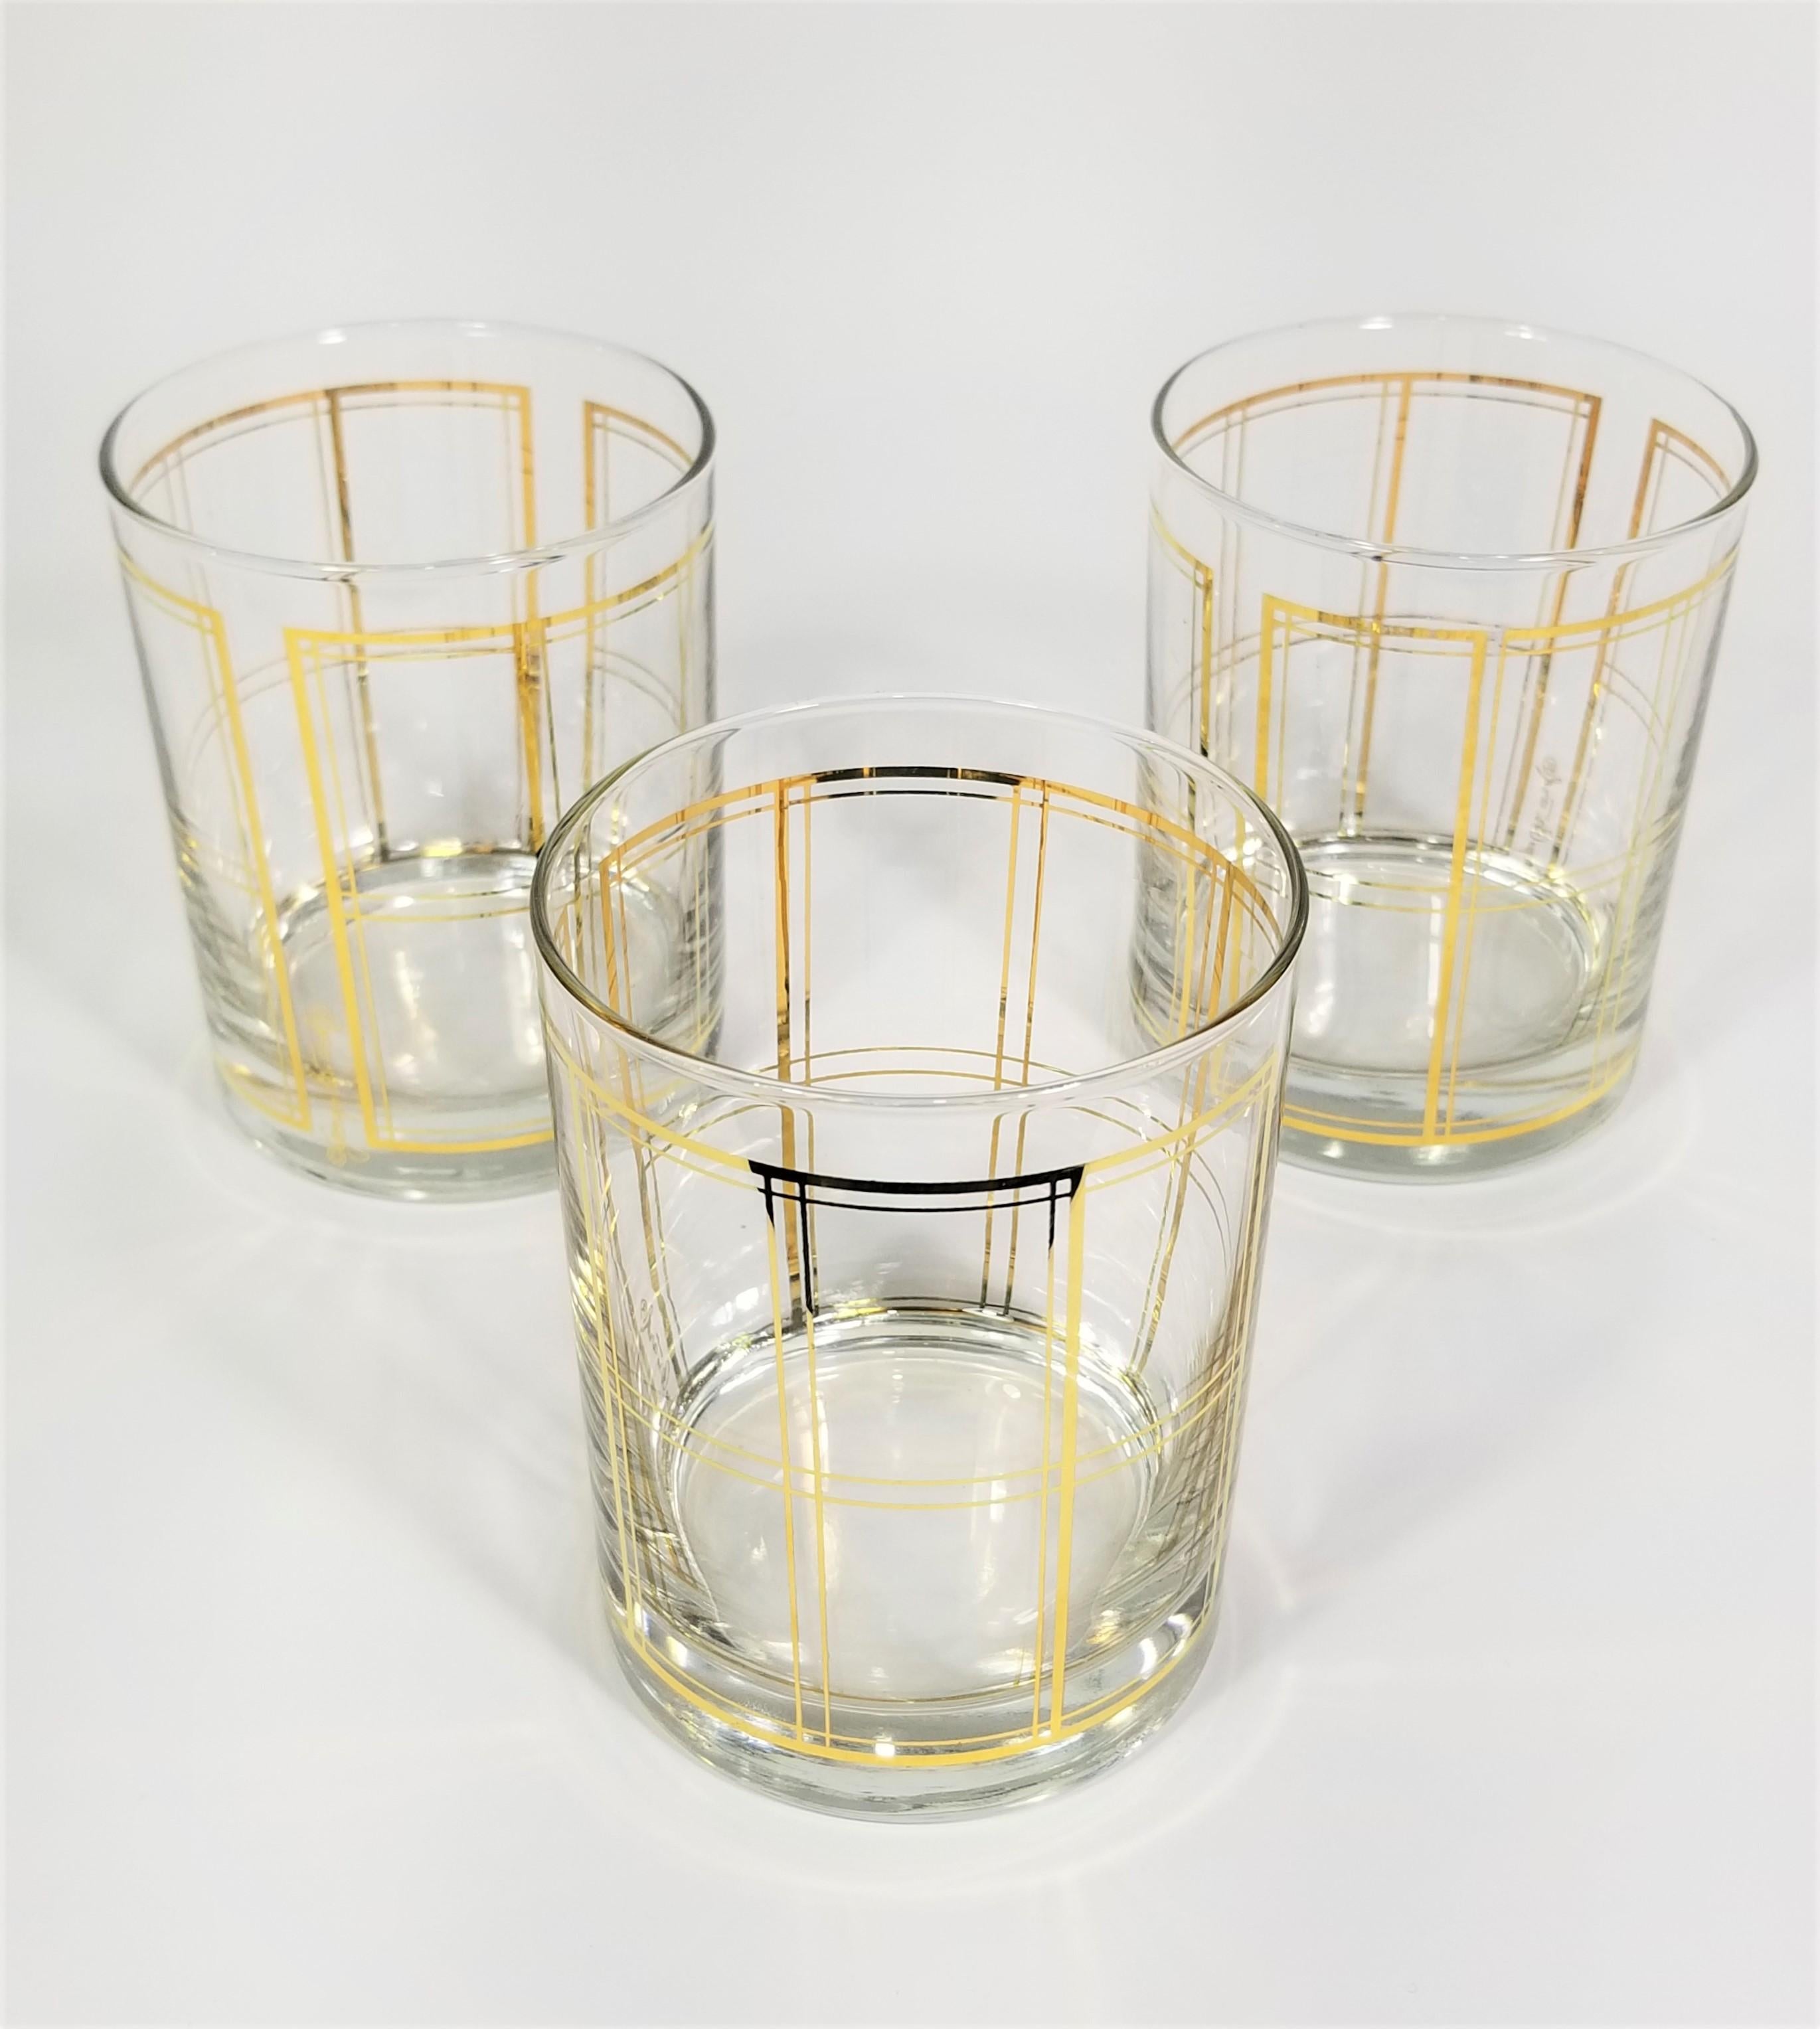 Mid Century 1960s 1970s Georges Briard 22K Gold Double Old Fashioned Rocks Glassware Barware. Set of 3. All Glasses are Signed and in Excellent Condition.